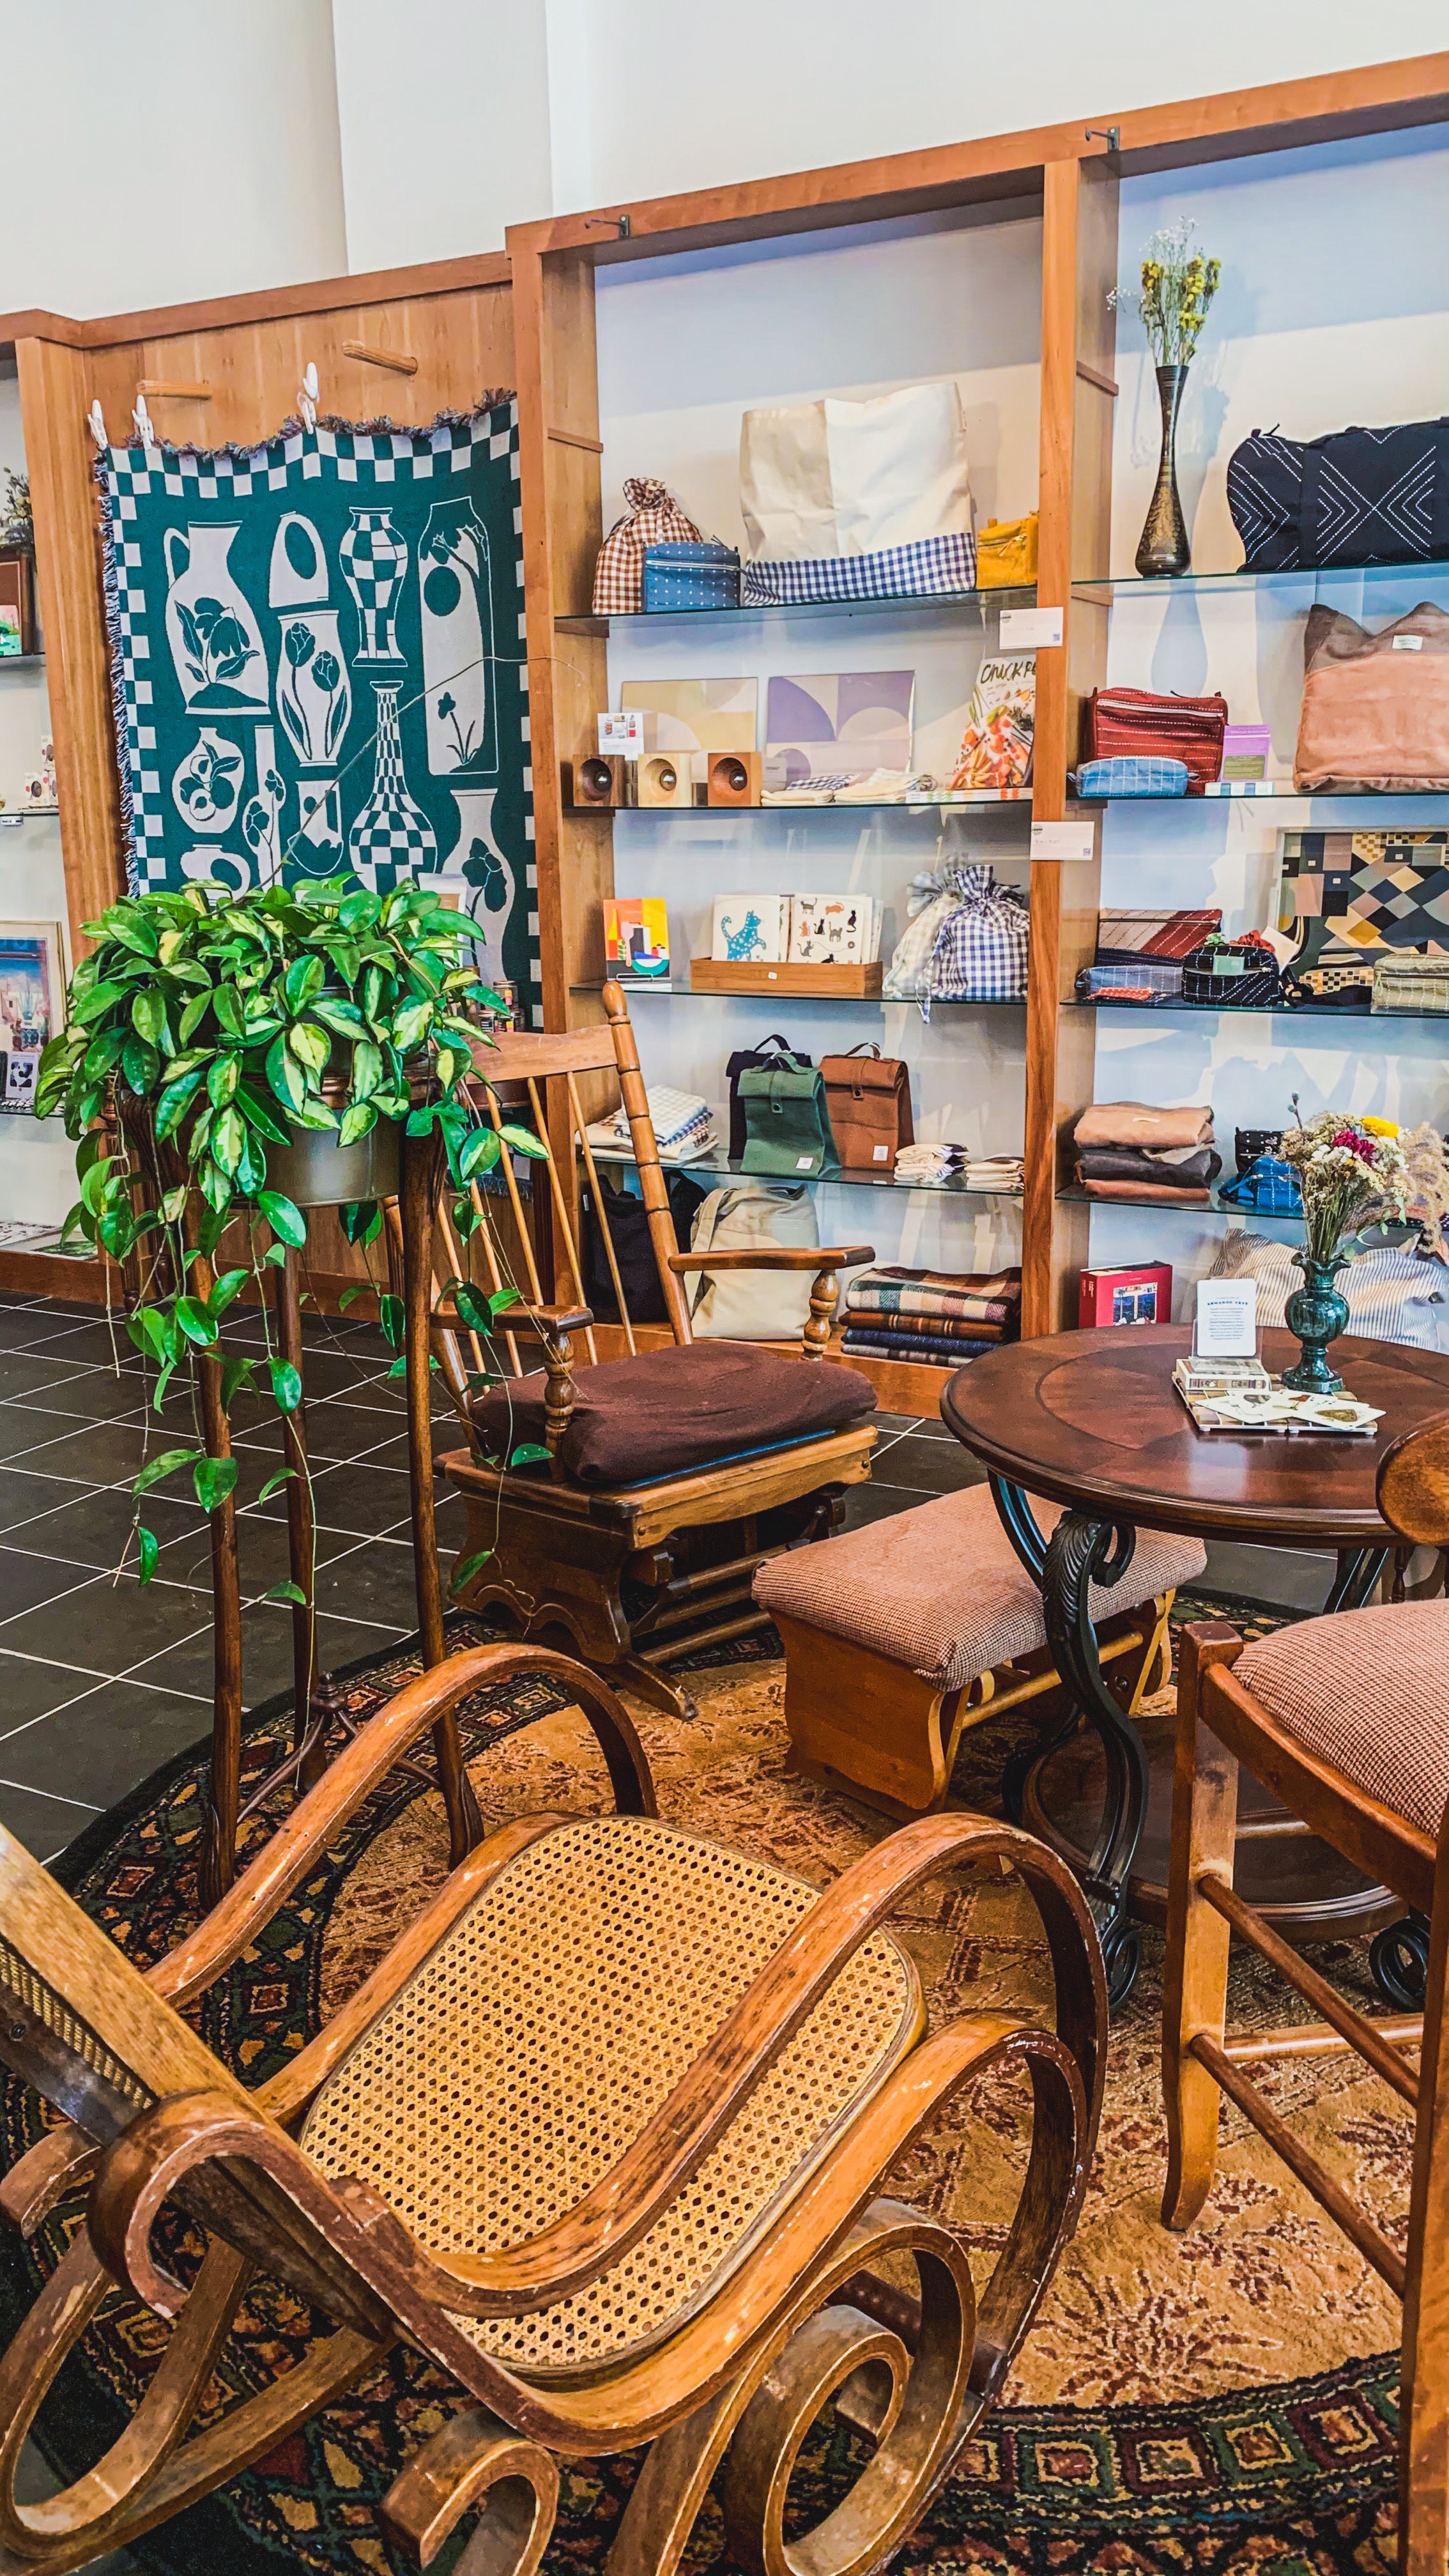 Green & Bean gift shop interior focused on the Bentwood rocking chair in the store seating area. In the background a green tapestry hangs behind a large hoya in a plant stand and shelves of colorful product can be seen